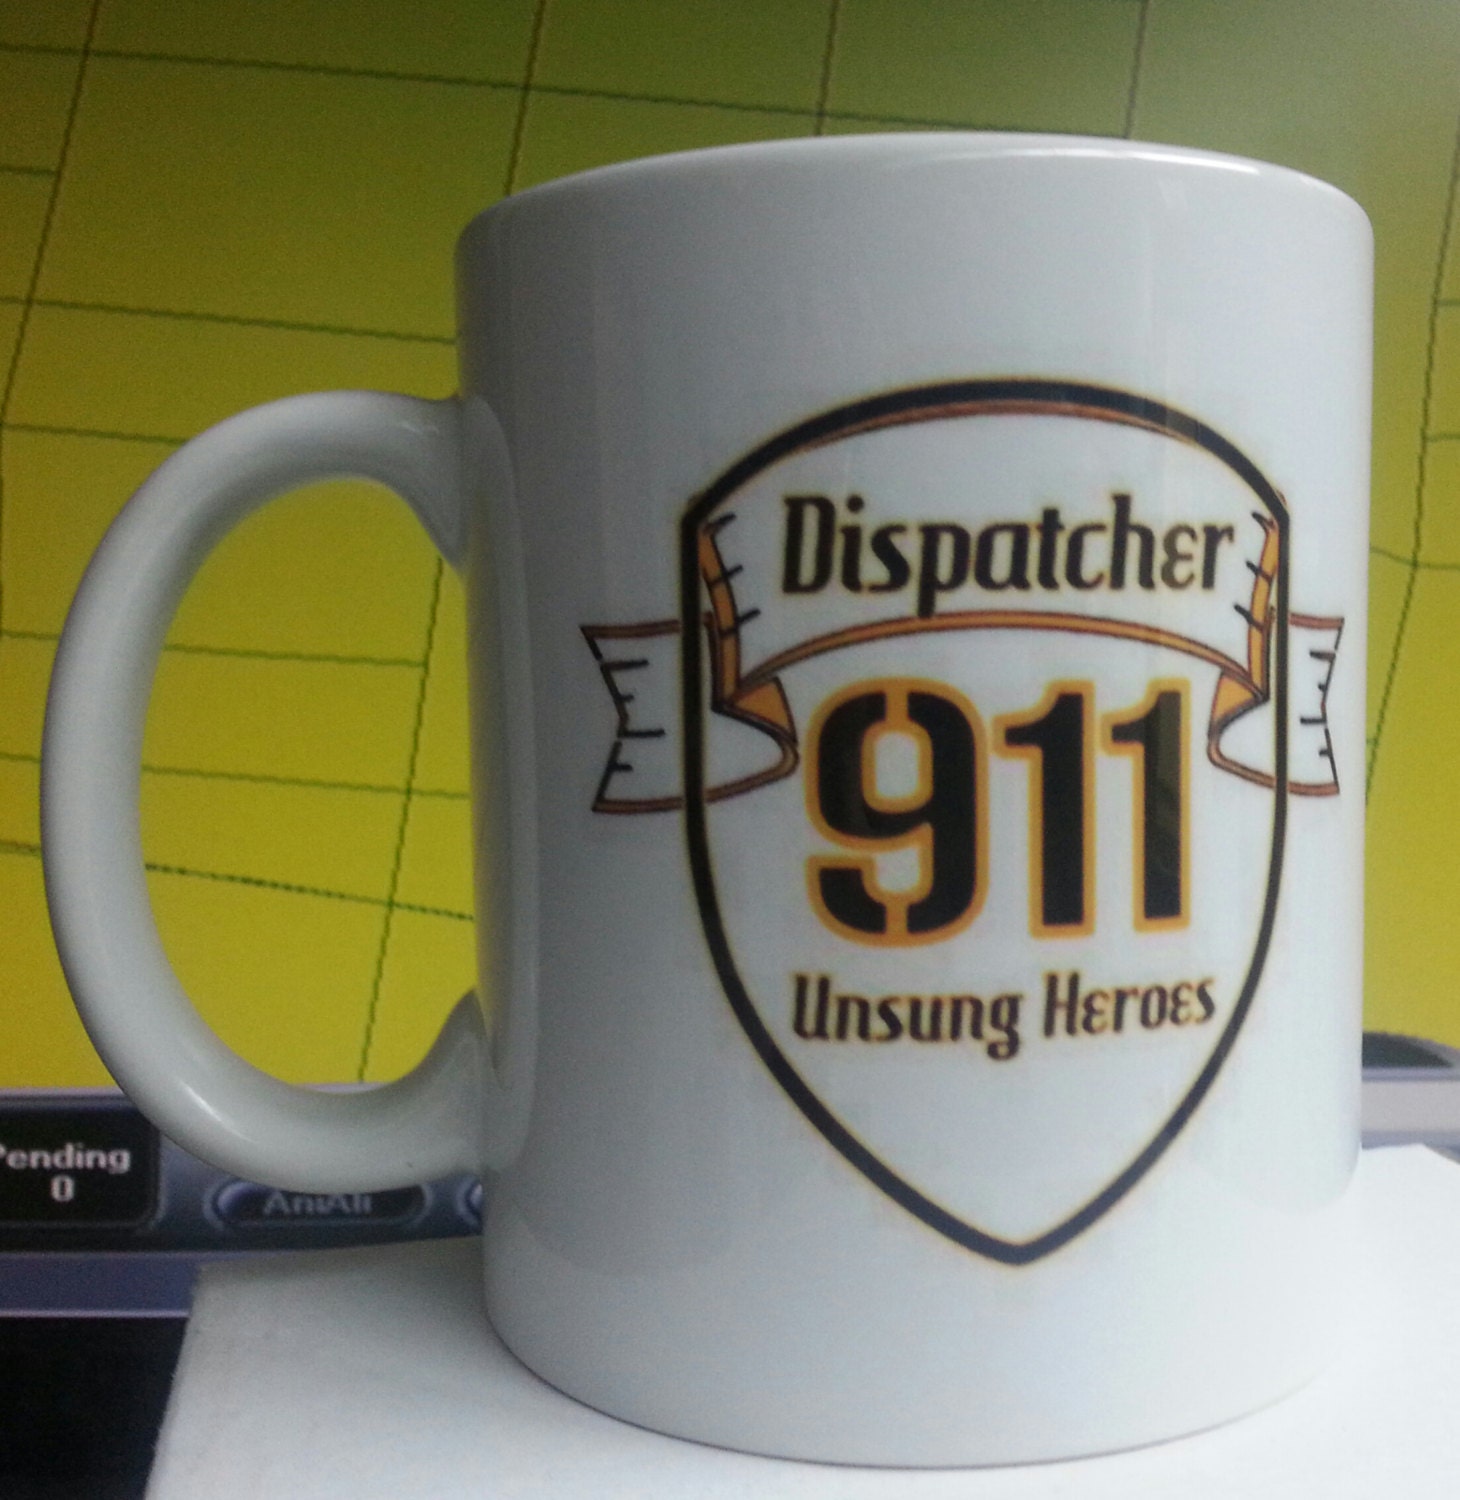 911 dispatch gifts